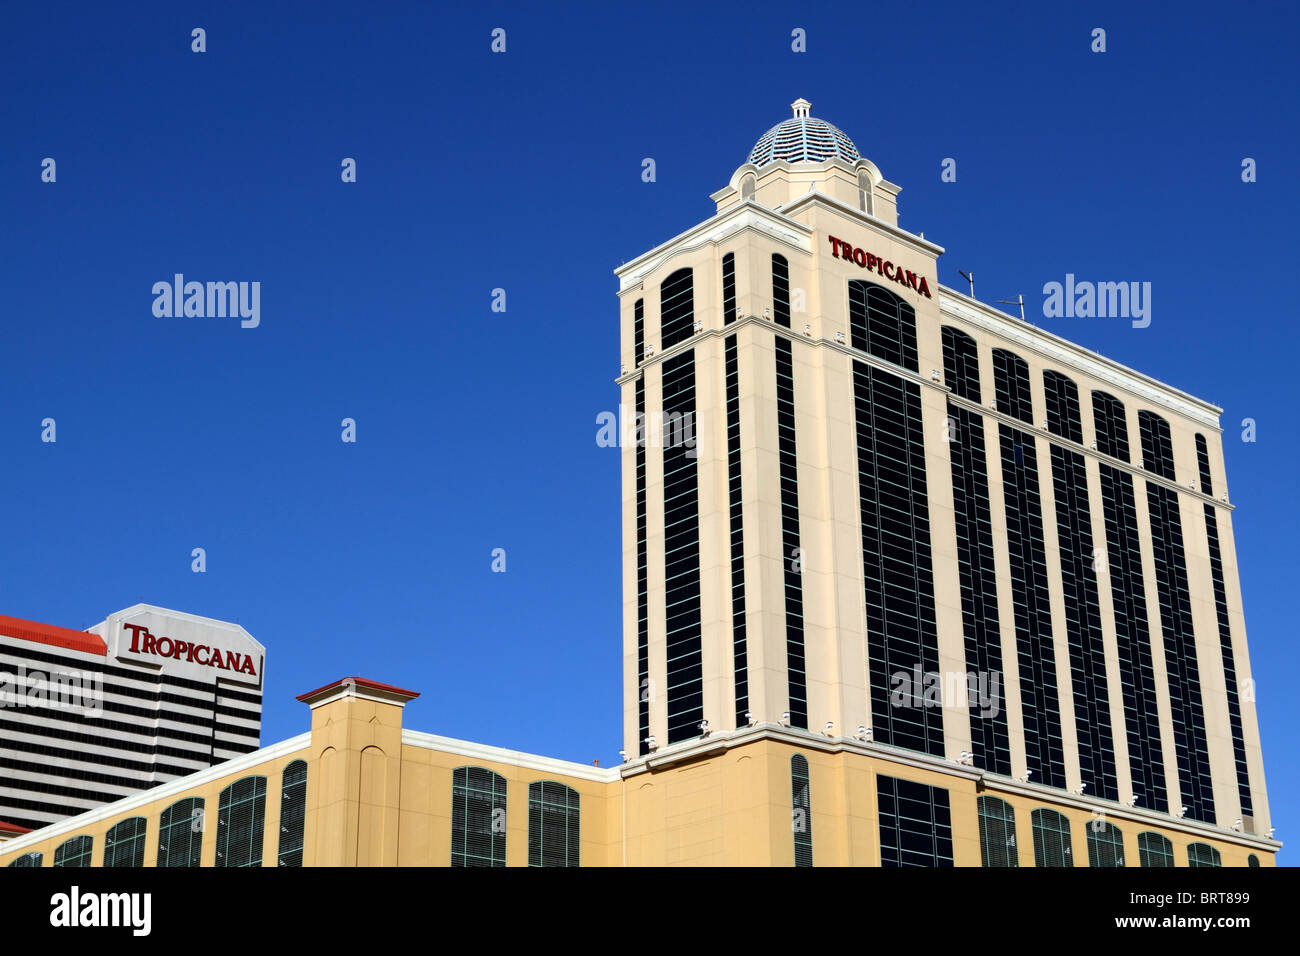 The Tropicana Casino and Resort hotel towers in Atlantic City, New Jersey, USA. Stock Photo